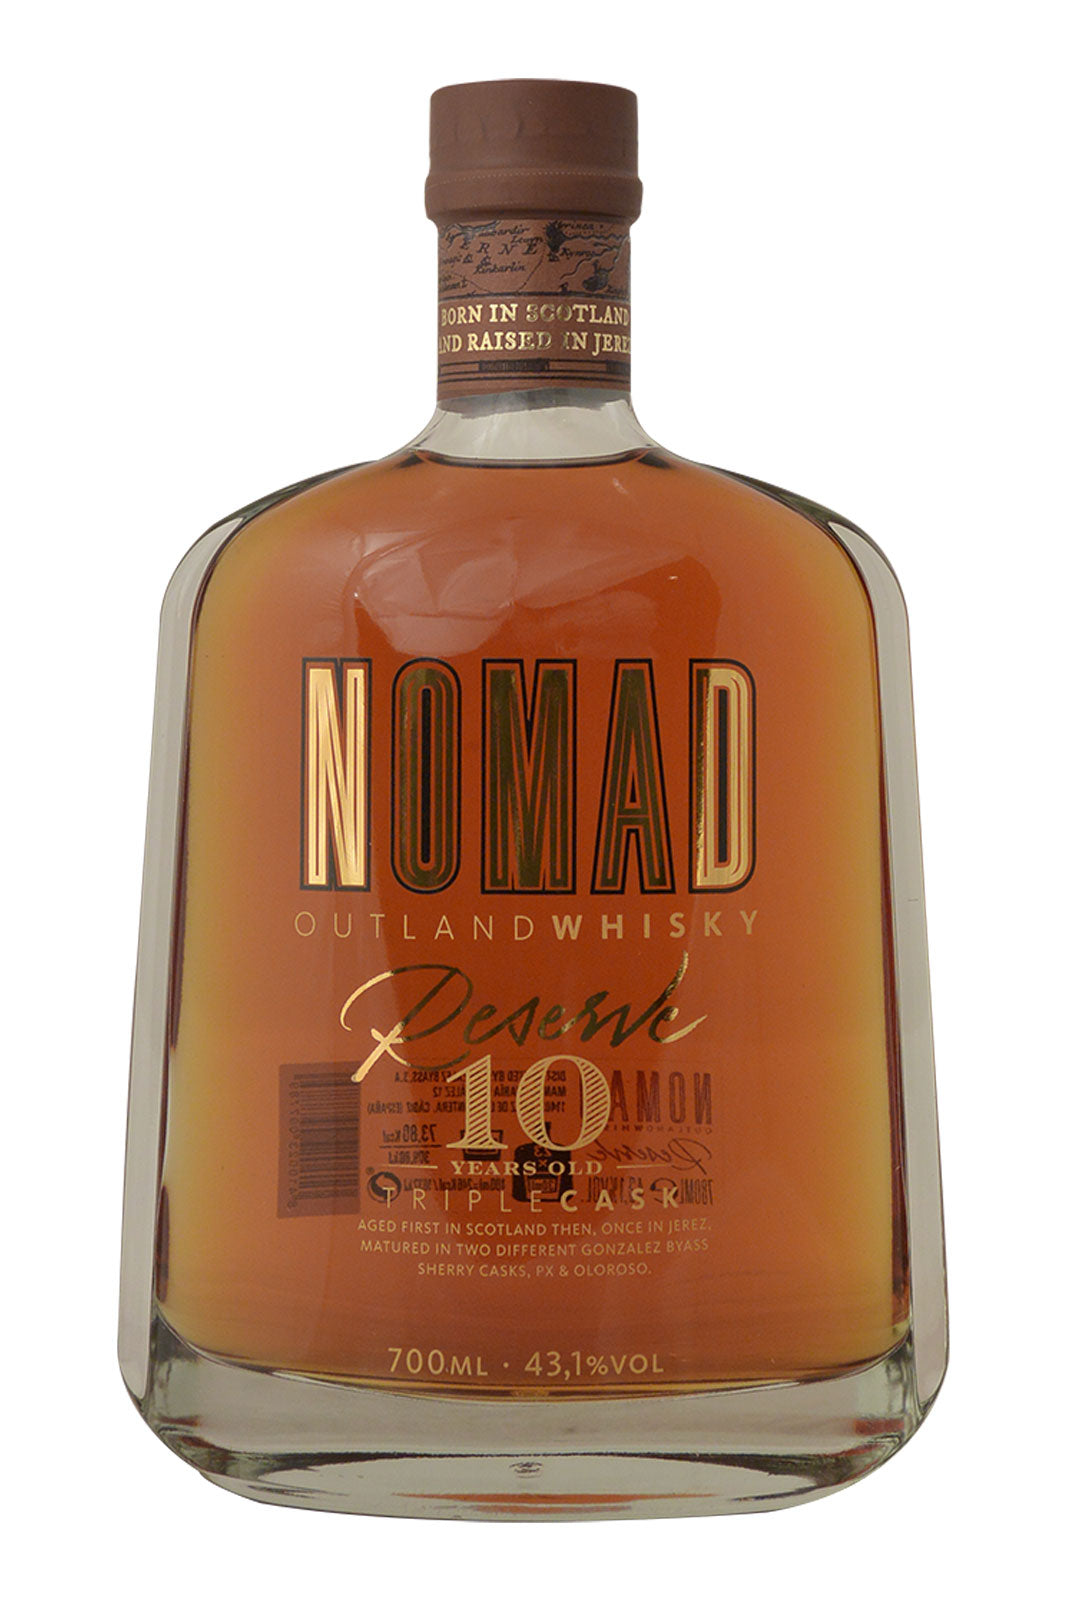 Nomad Outland Reserve Triple Cask 10 Year Old